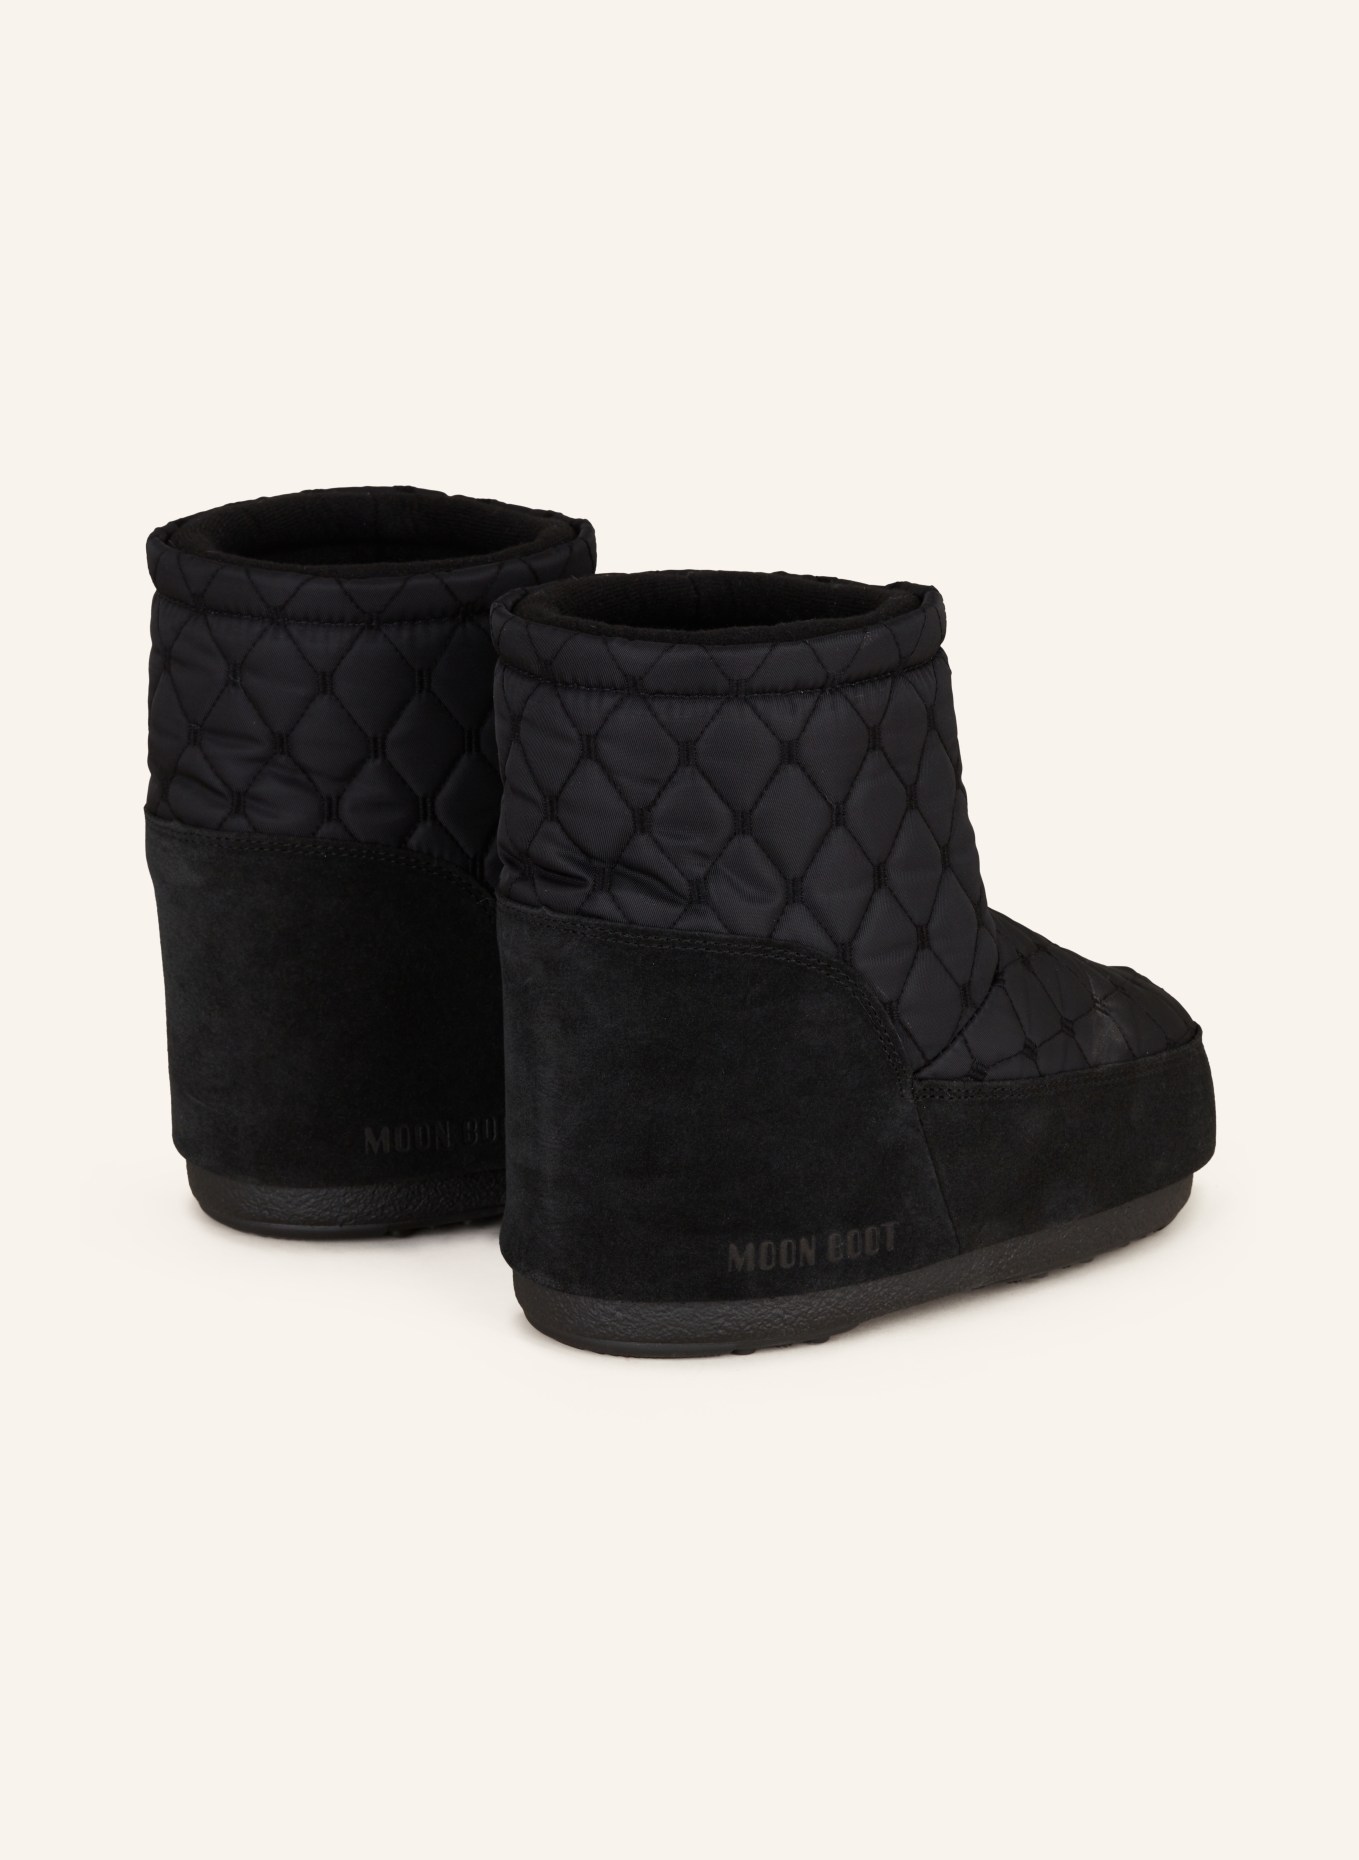 MOON BOOT Moon Boots ICON LOW NOLACE QUILTED, Farbe: SCHWARZ (Bild 2)